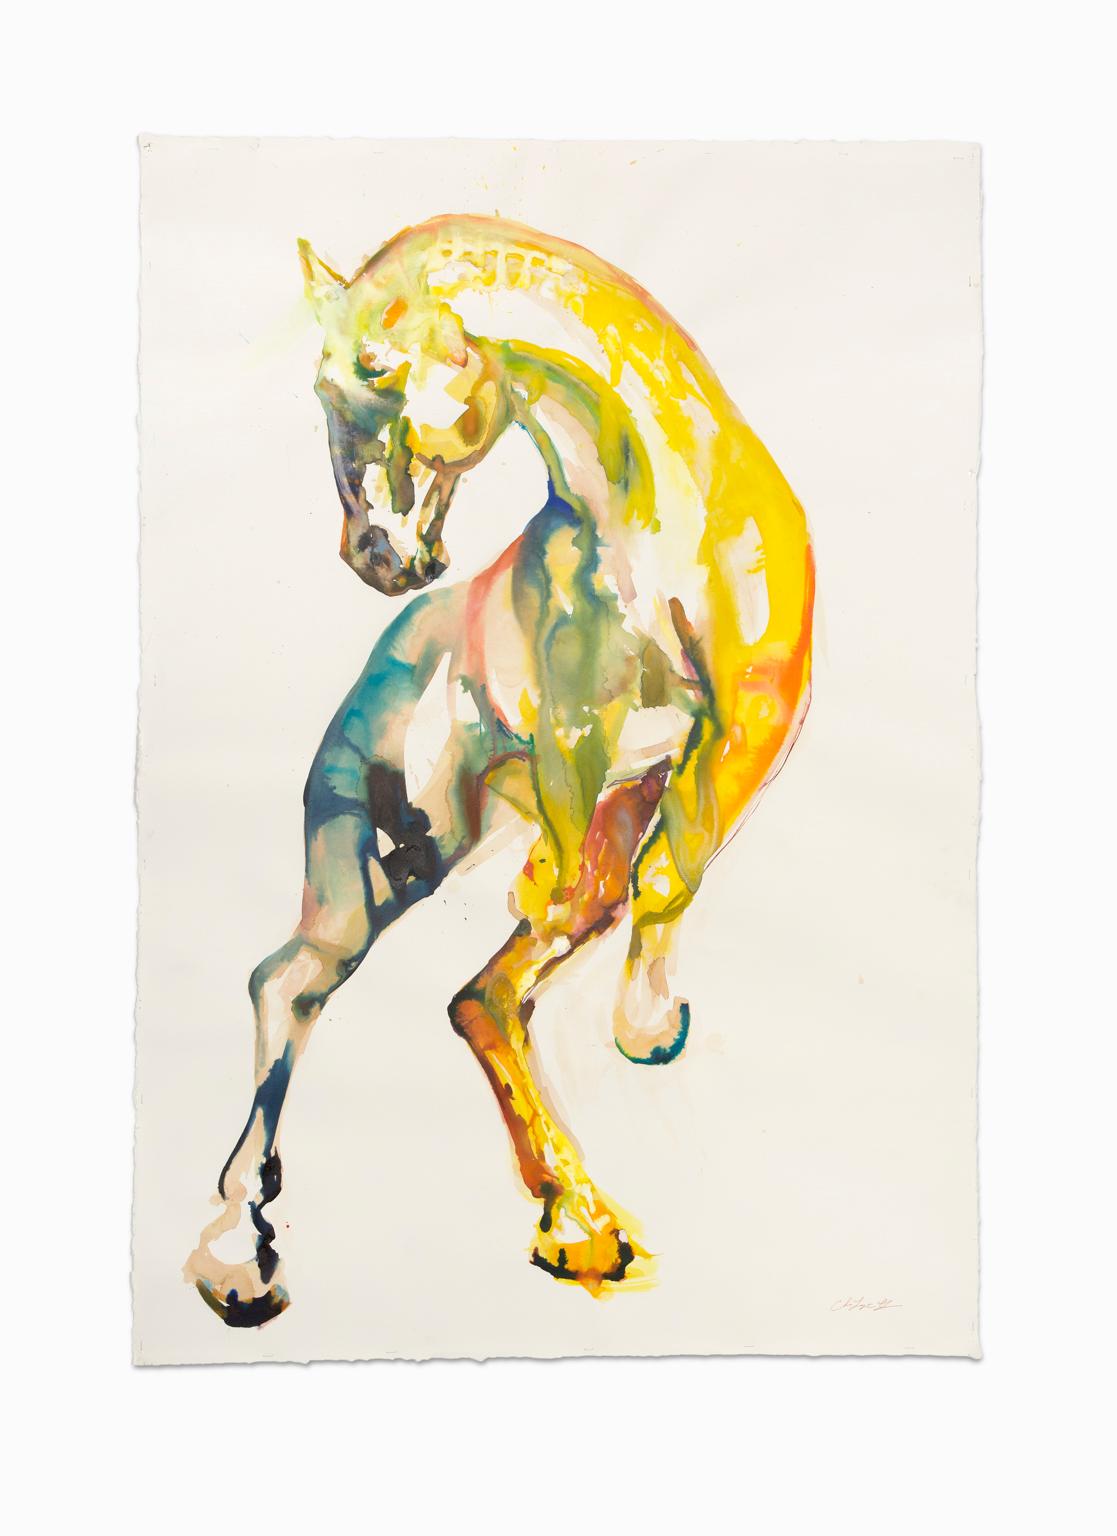 "Yellow Horse I", Large Mixed Medium, India Ink and Wine on Deckle BFK Paper